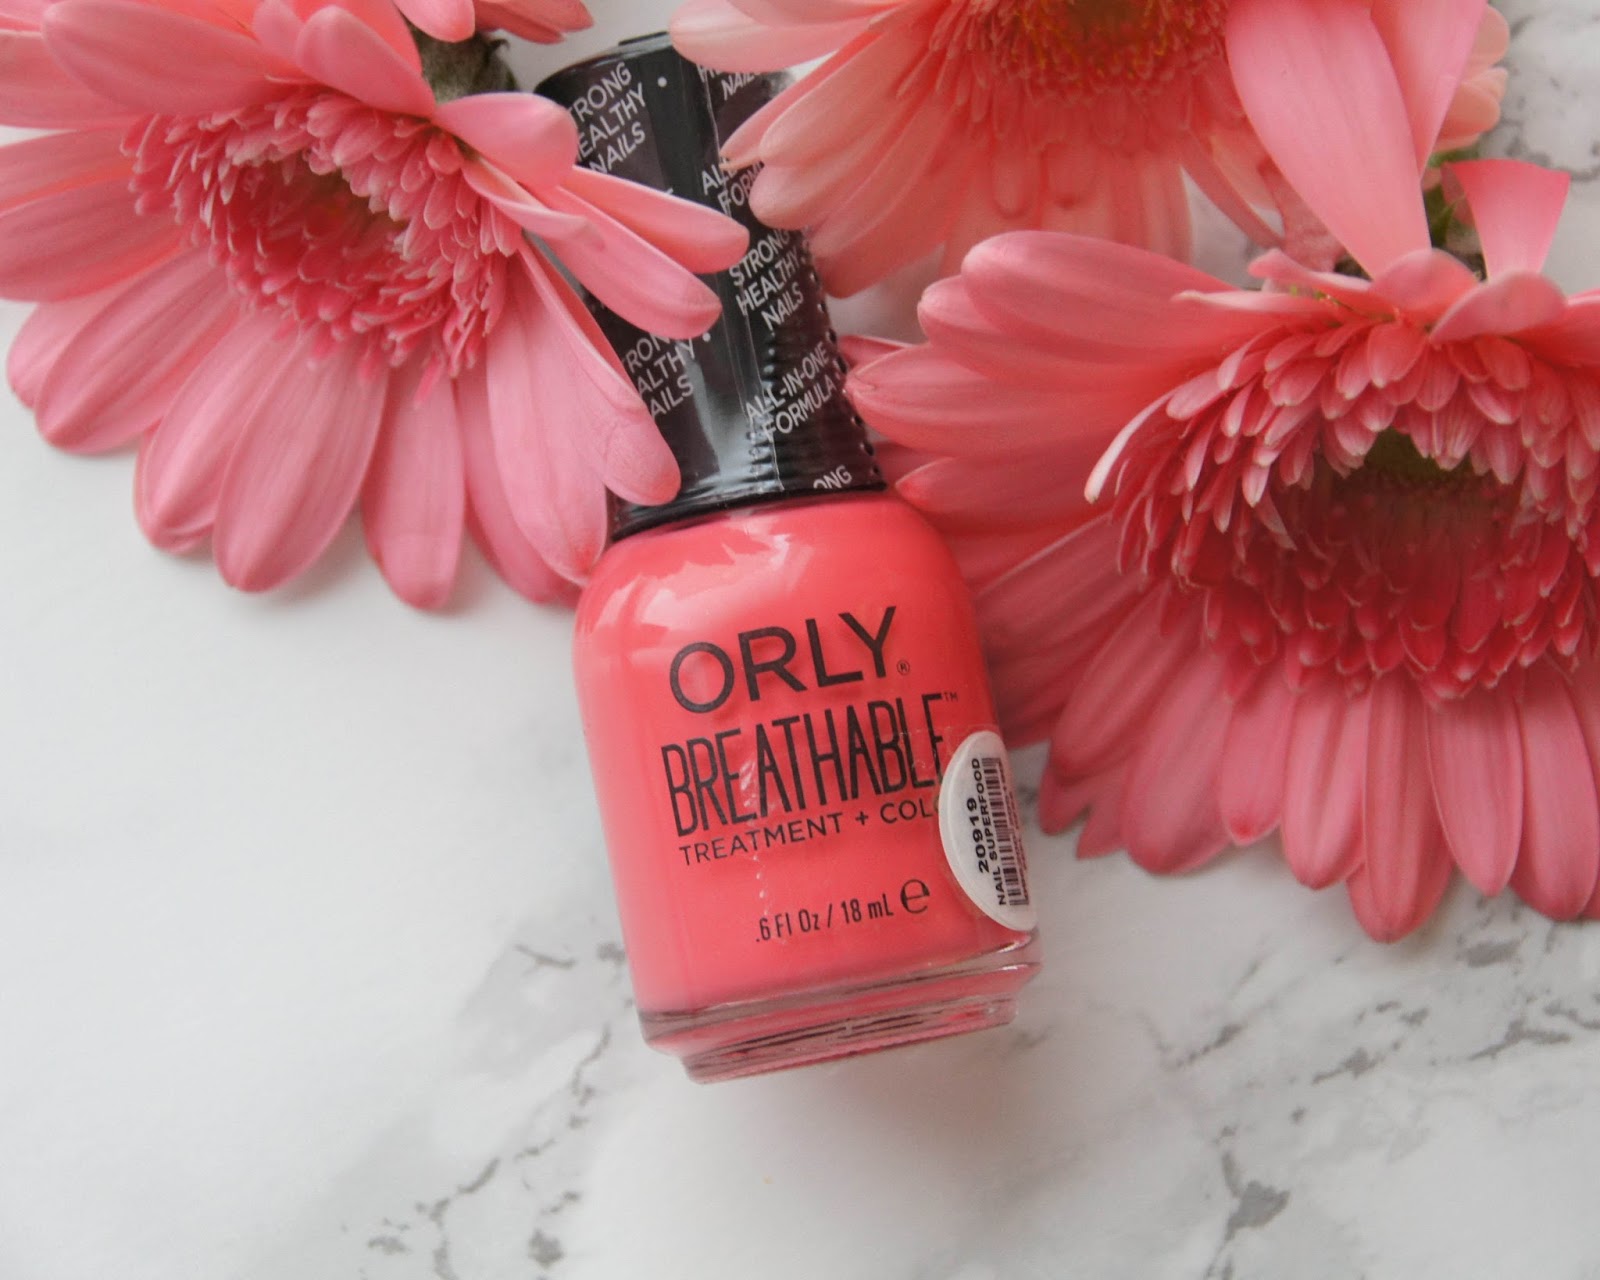 10. Orly Breathable Treatment + Color Nail Polish in "A Touch of Color" - wide 7